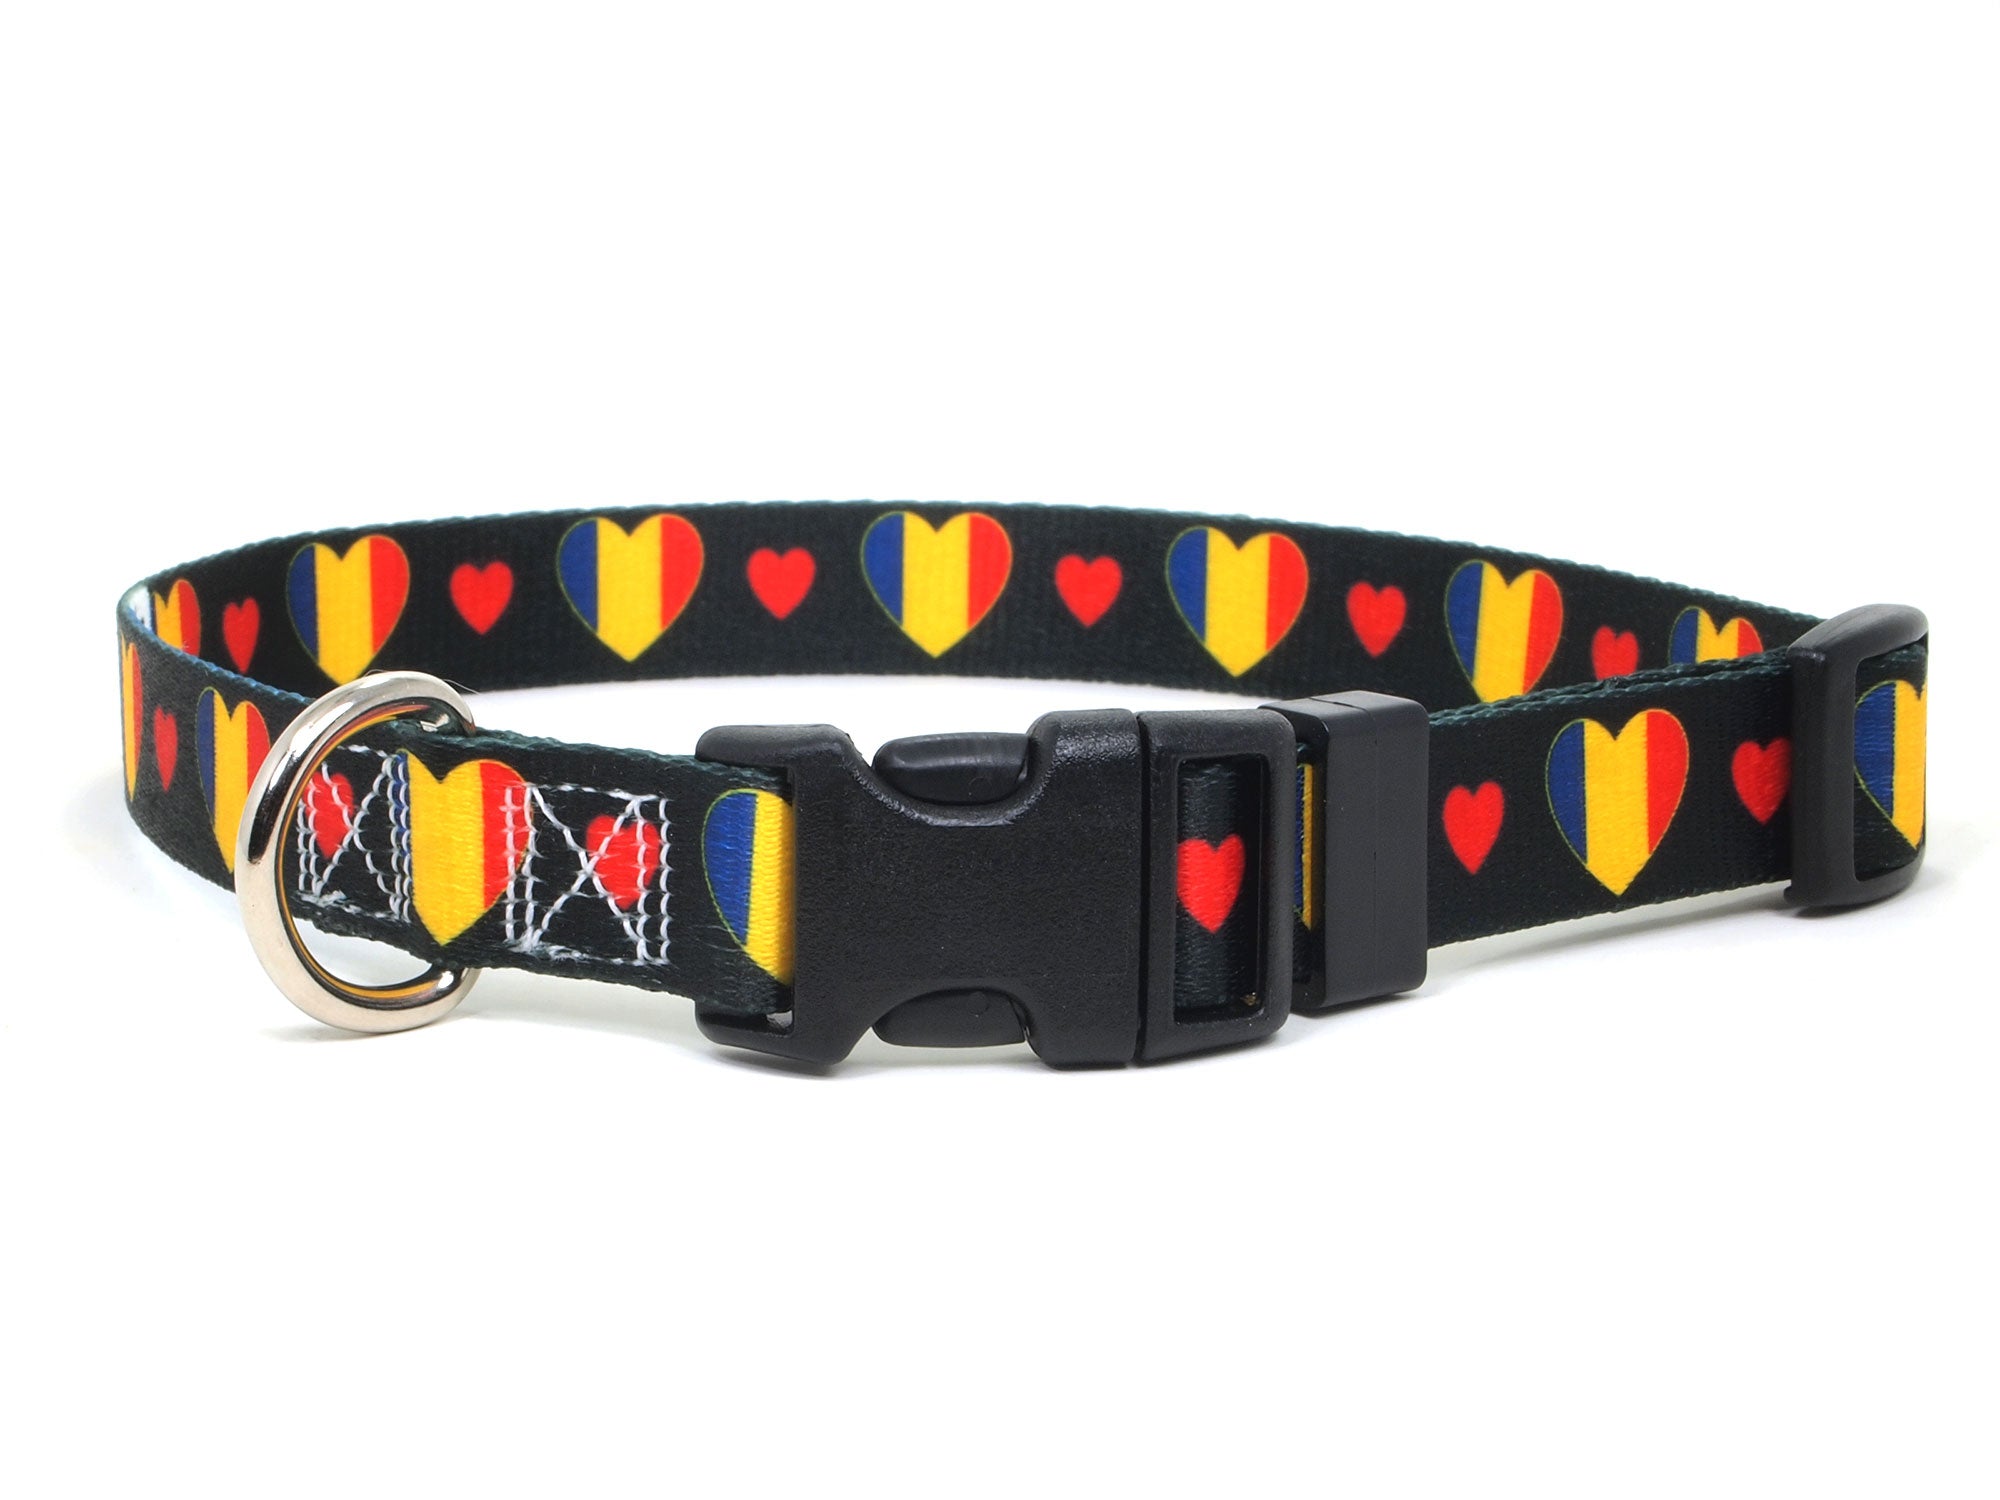 Dog Collar with Chad Hearts Pattern in black